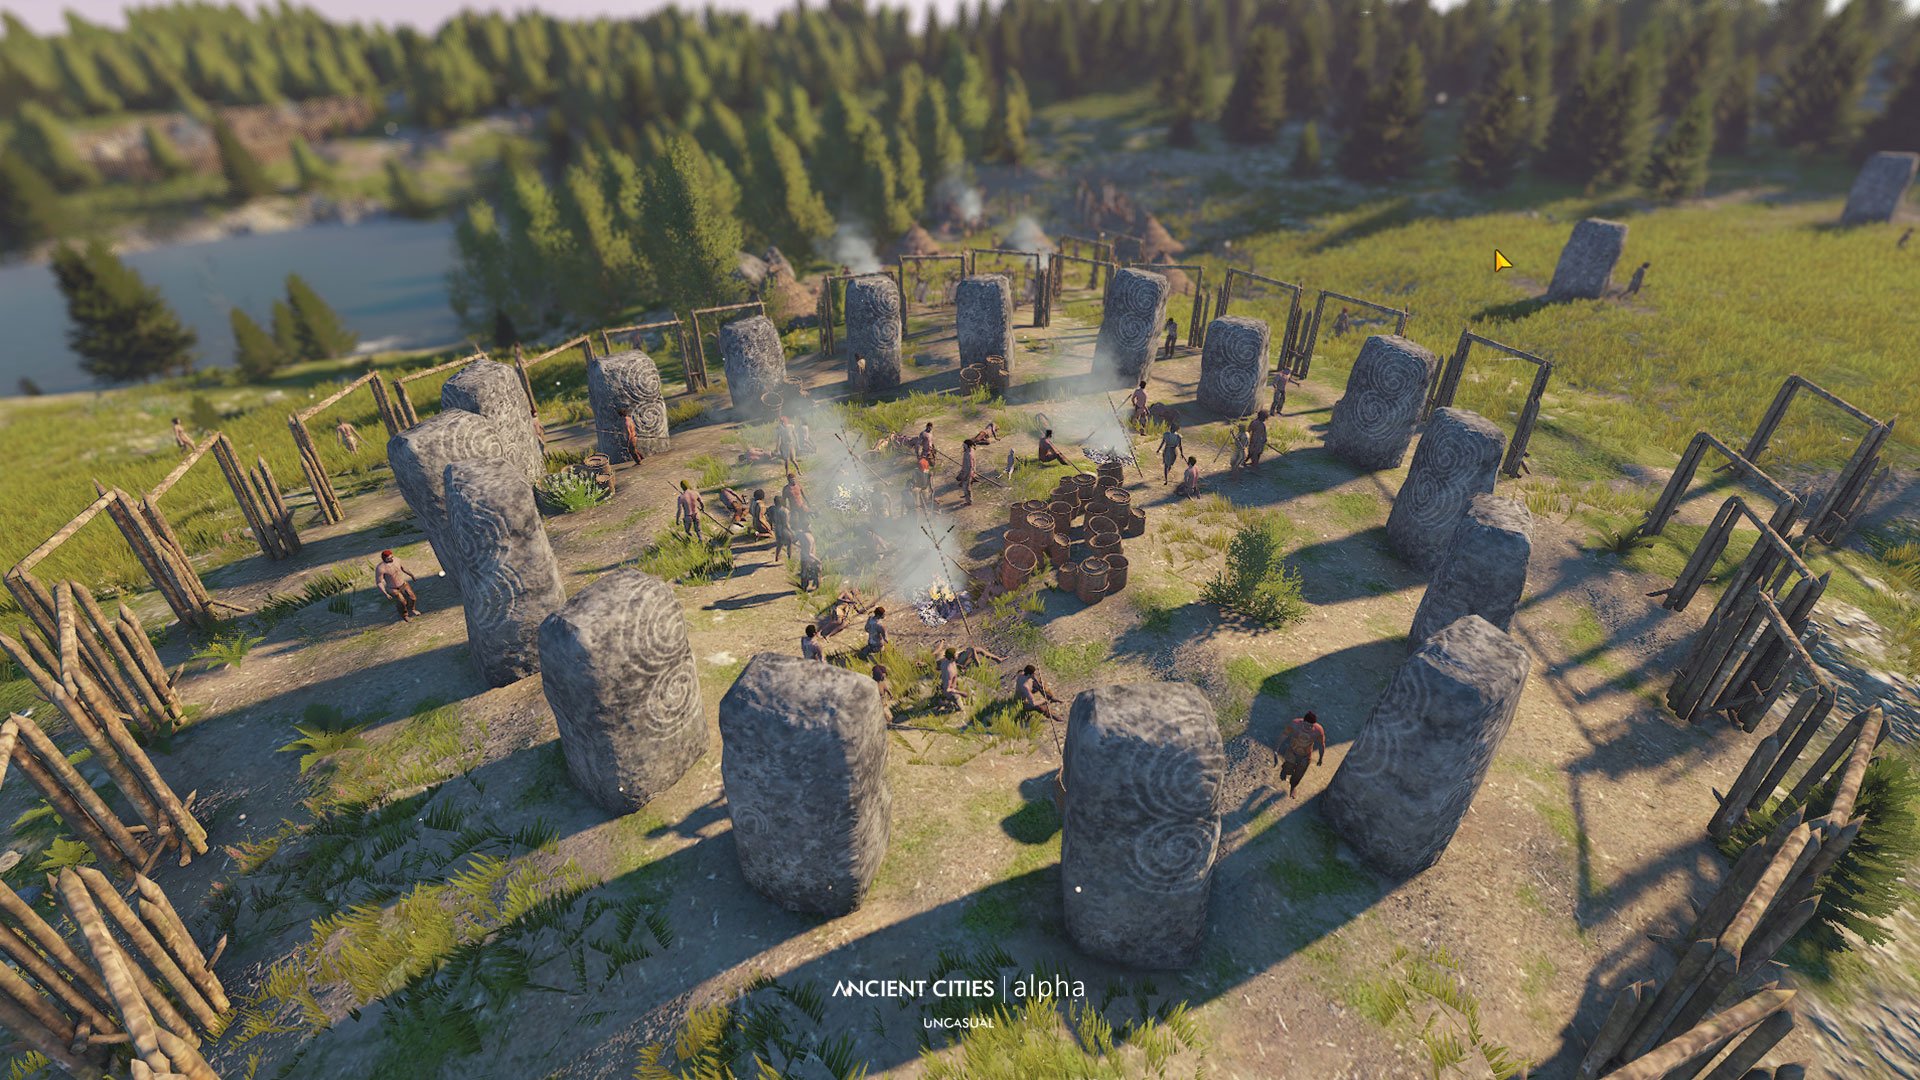 Ancient Cities is an upcoming PC game city builders should keep an eye